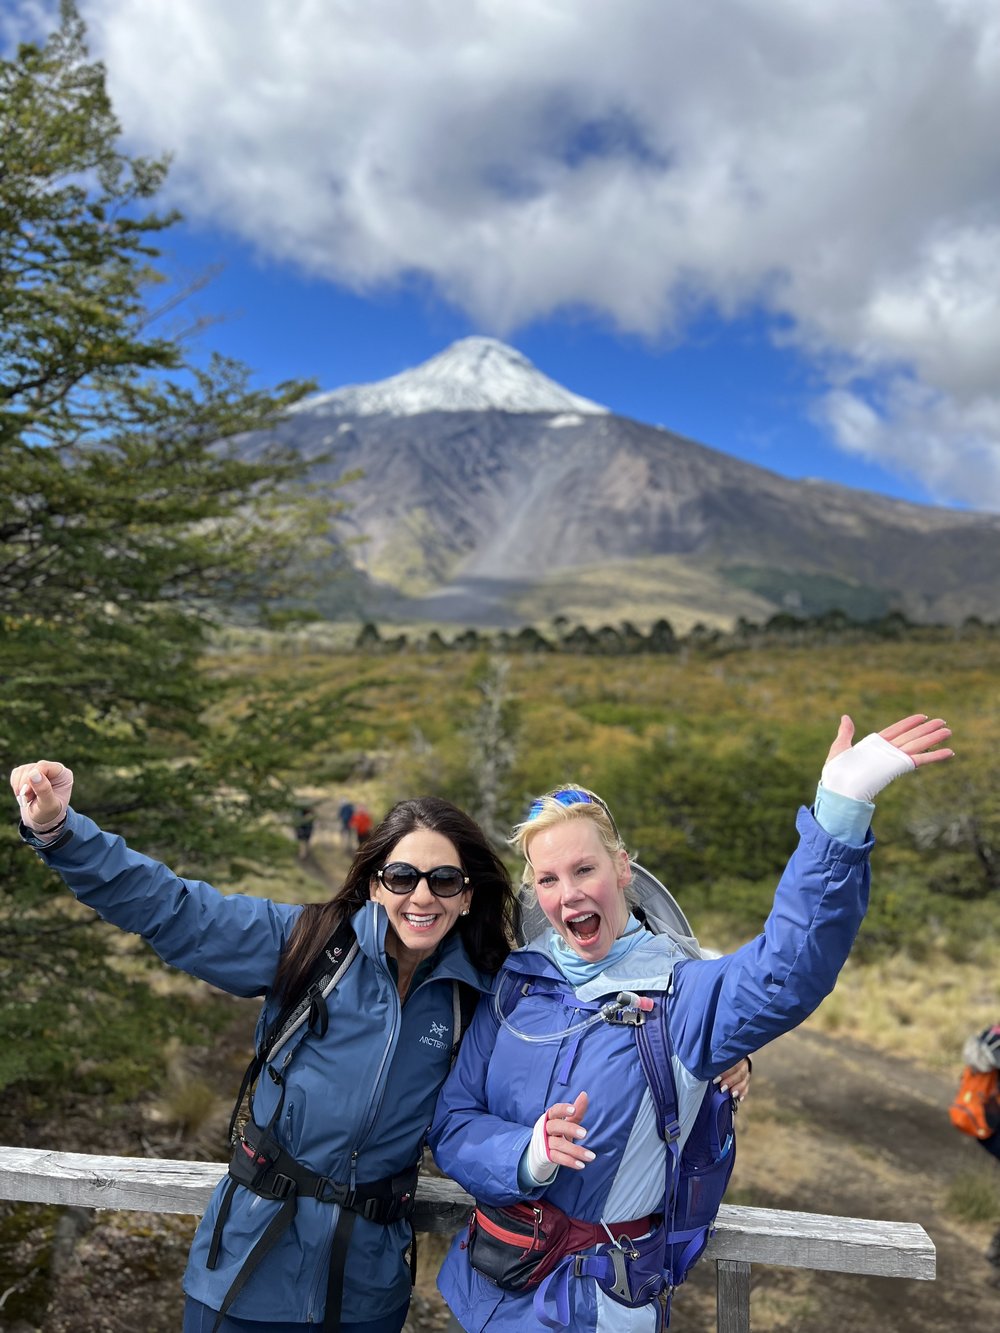 Debra and one of her best friends, Tracy, hiking Chile